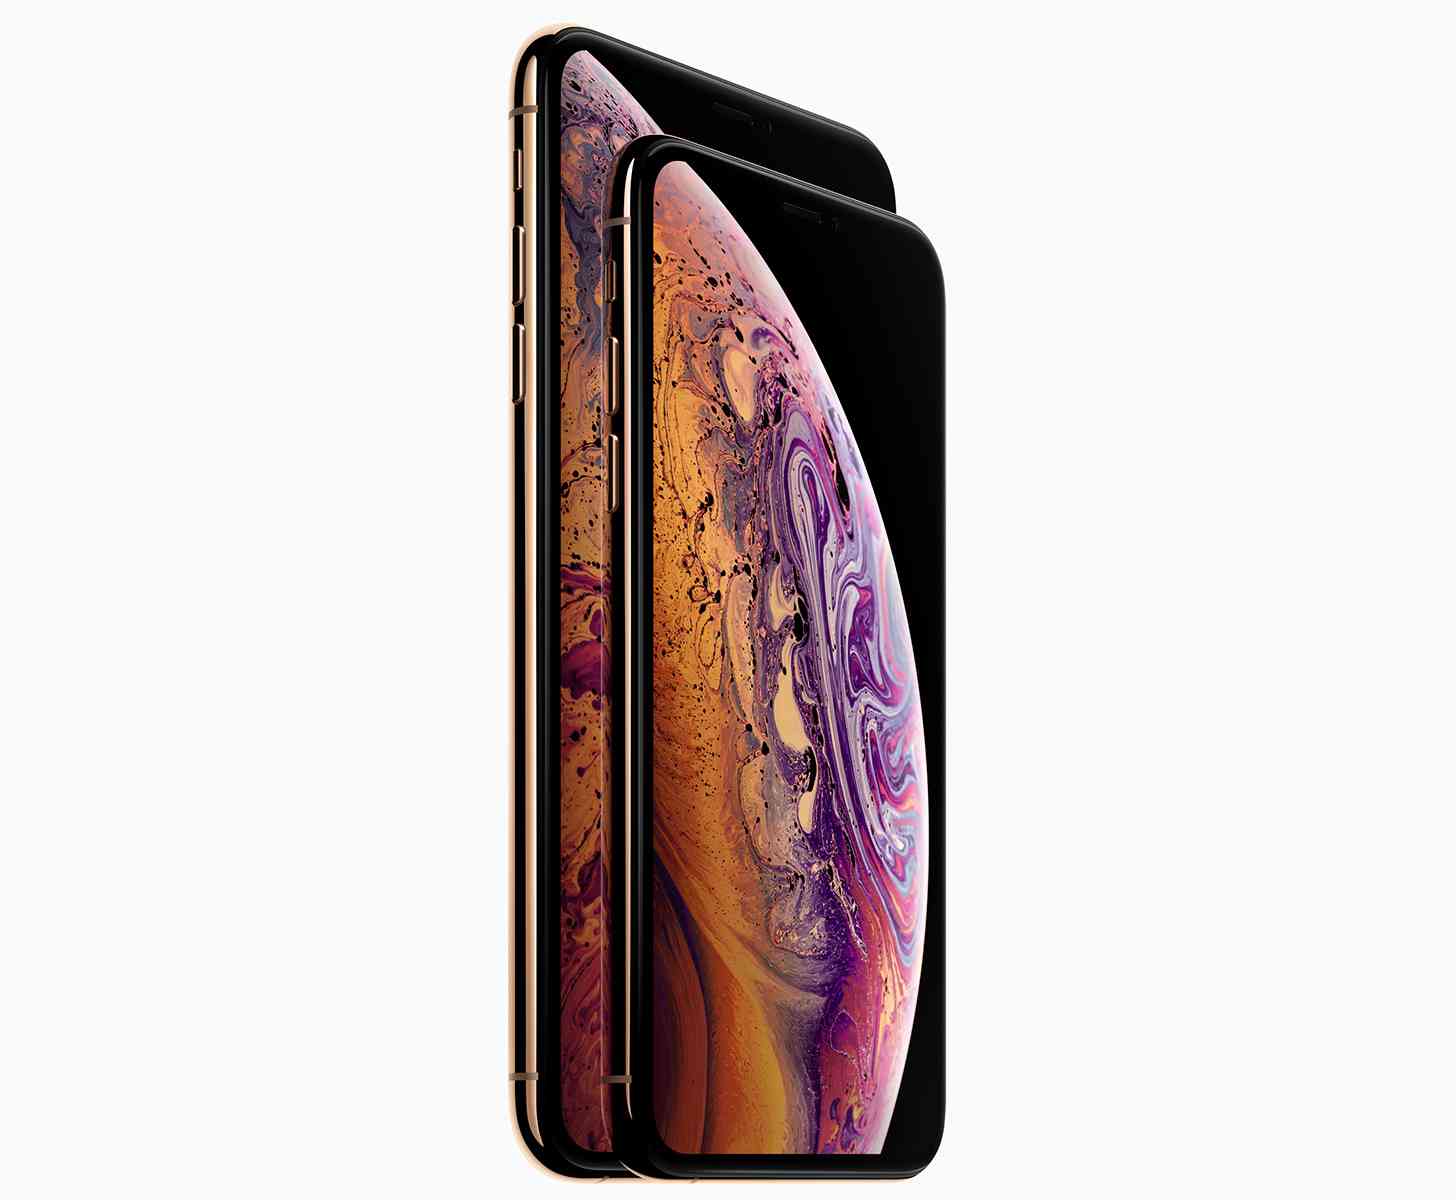 iPhone Xs, iPhone Xs Max official